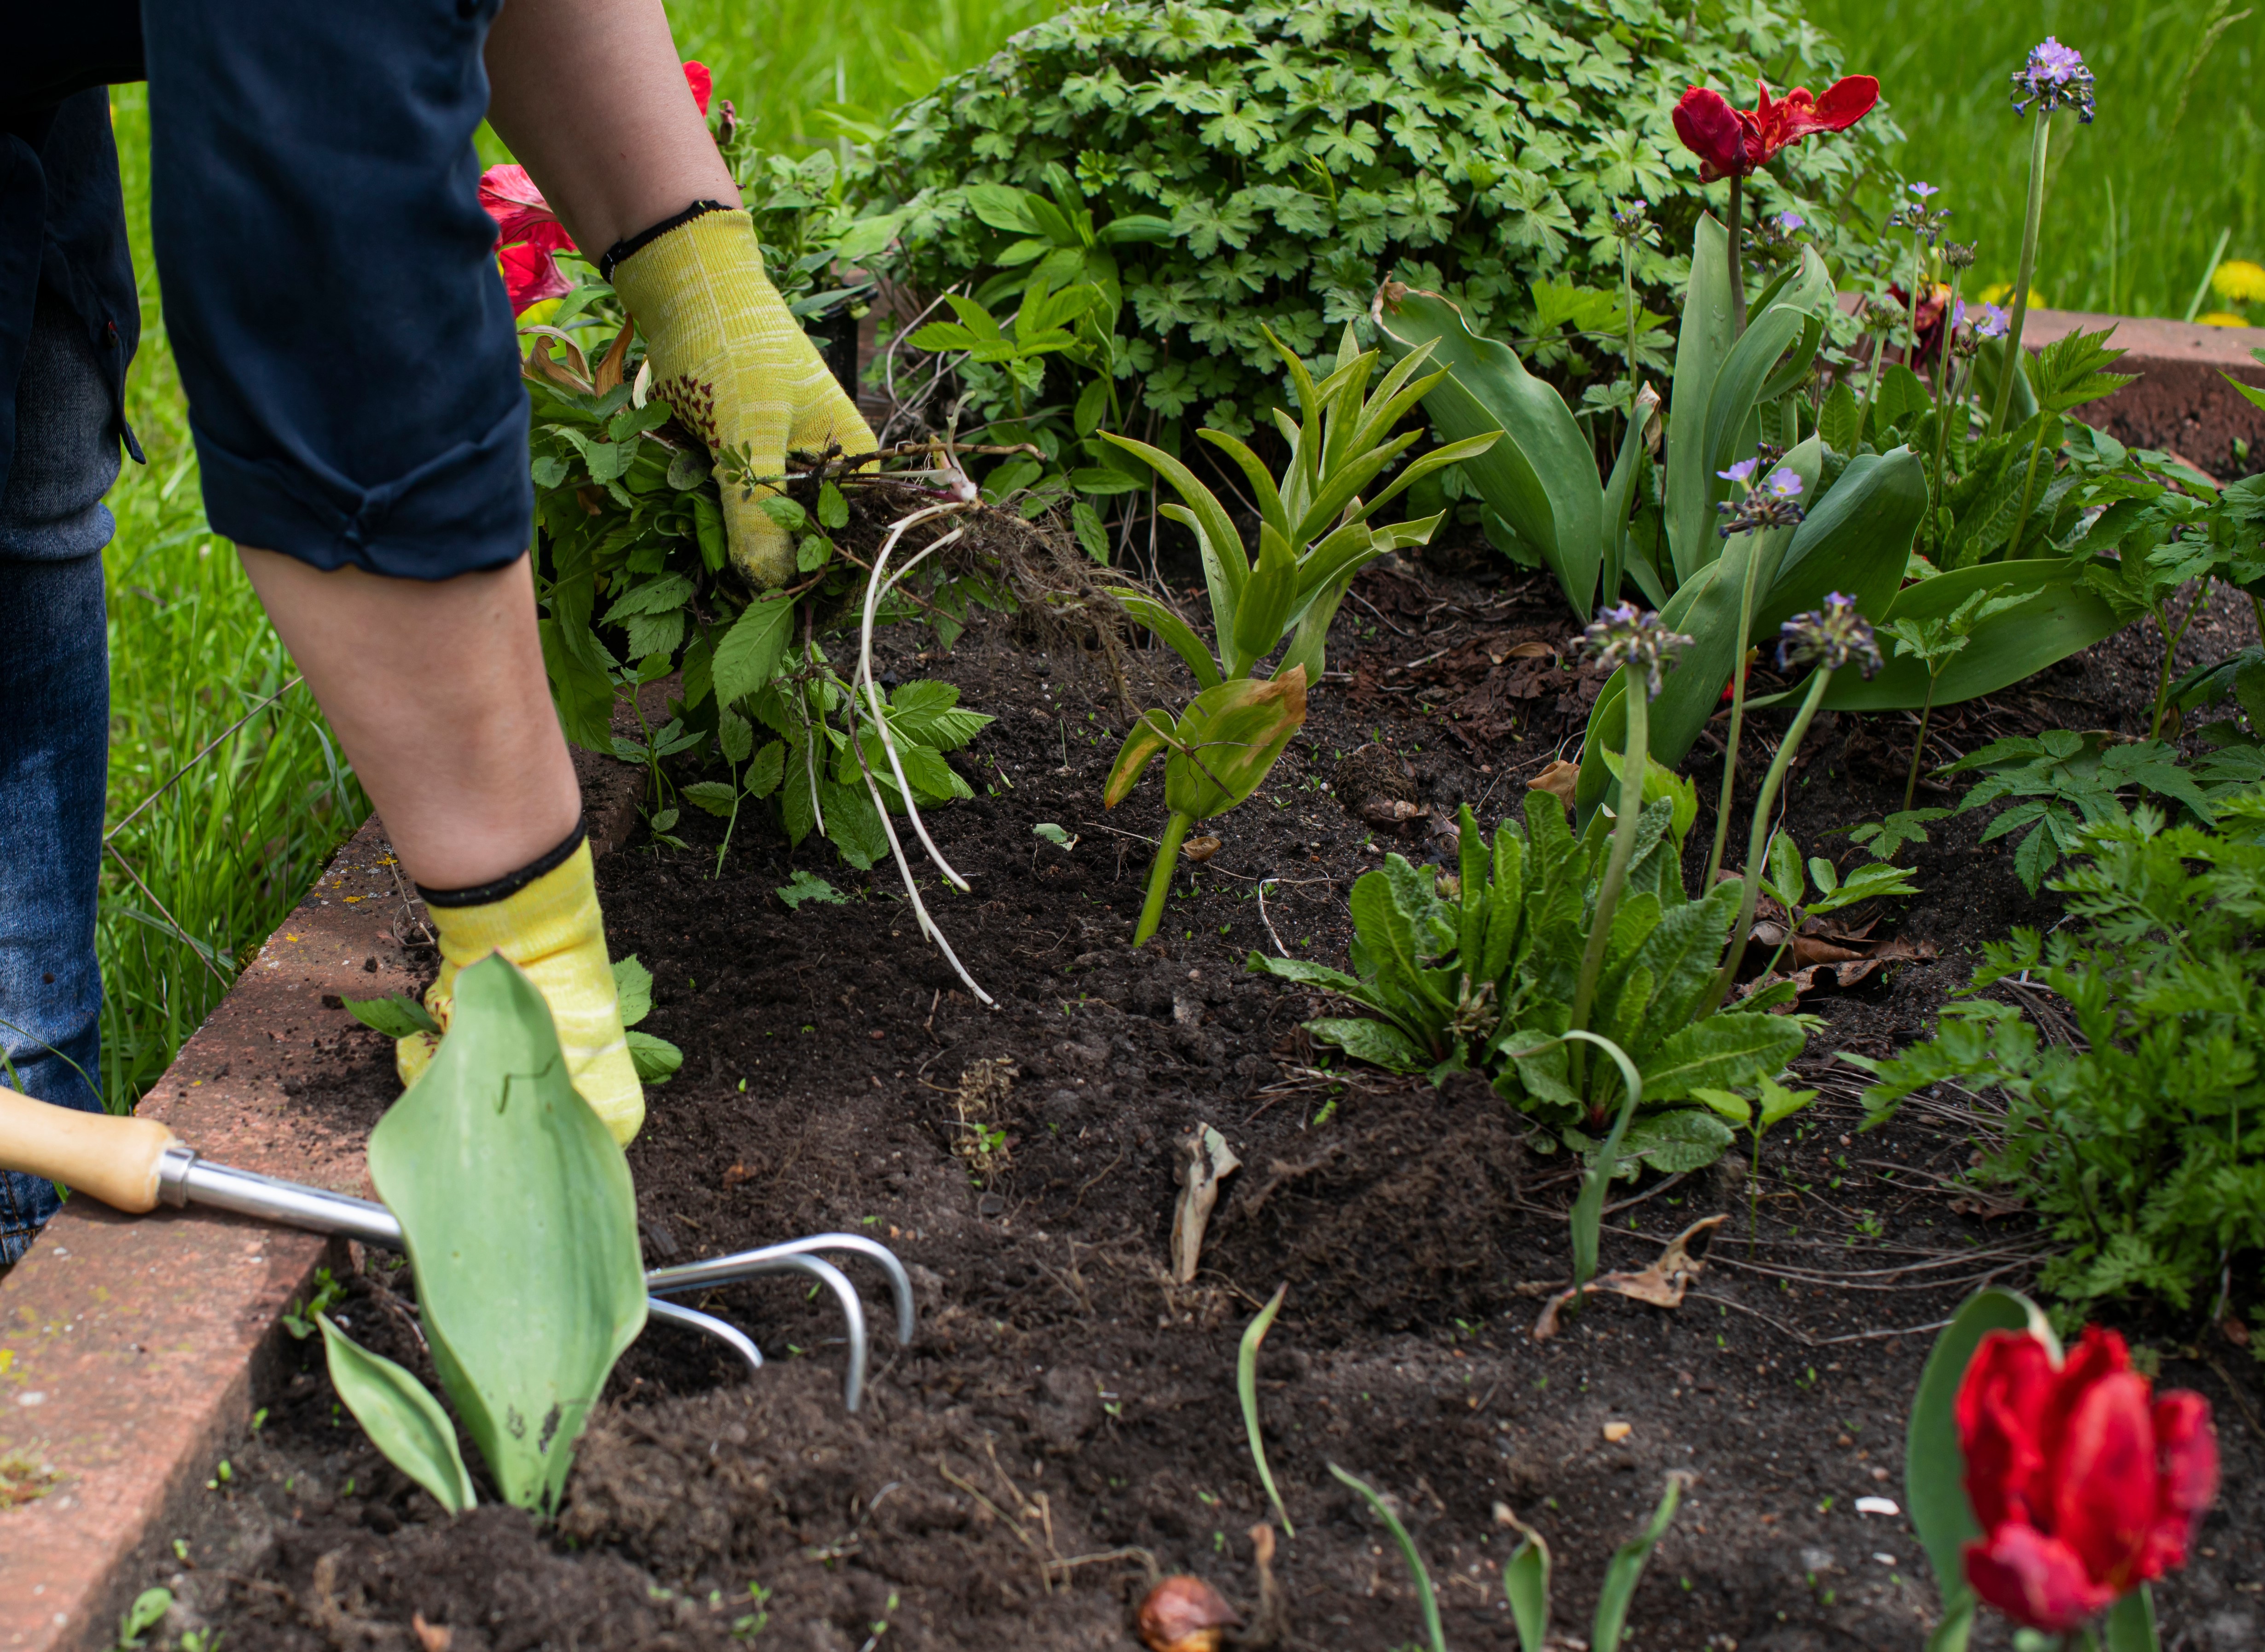 How to kill weeds in flower beds | Love The Garden